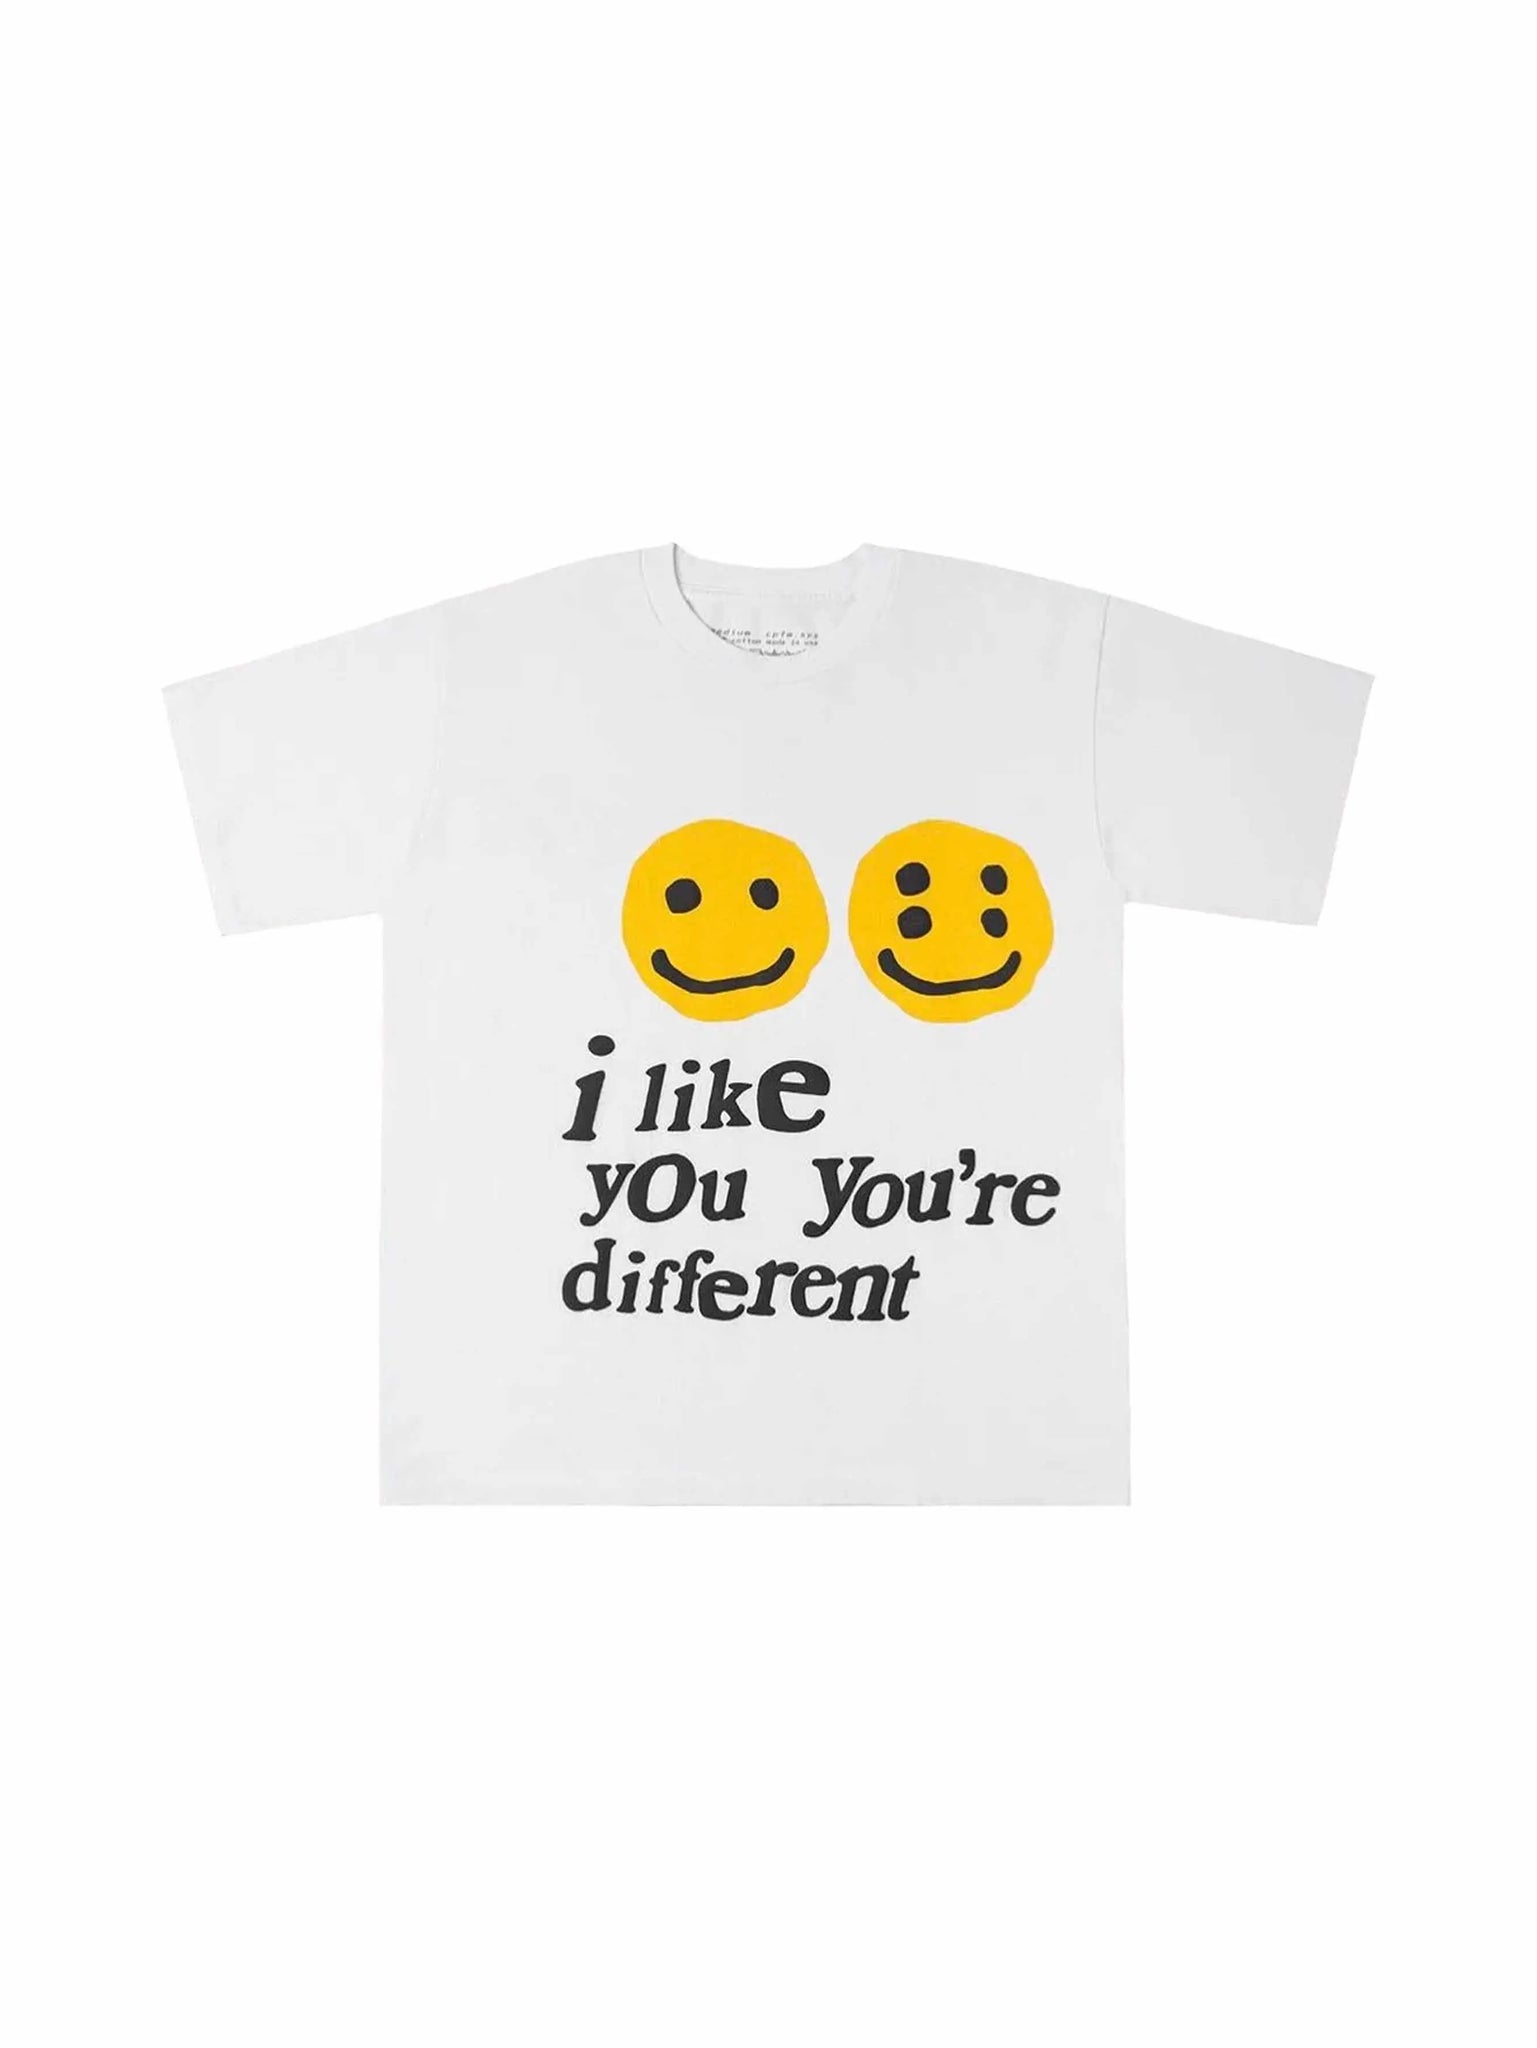 Cactus Plant Flea Market x Union I Like You You're Different Tee White in Auckland, New Zealand - Shop name